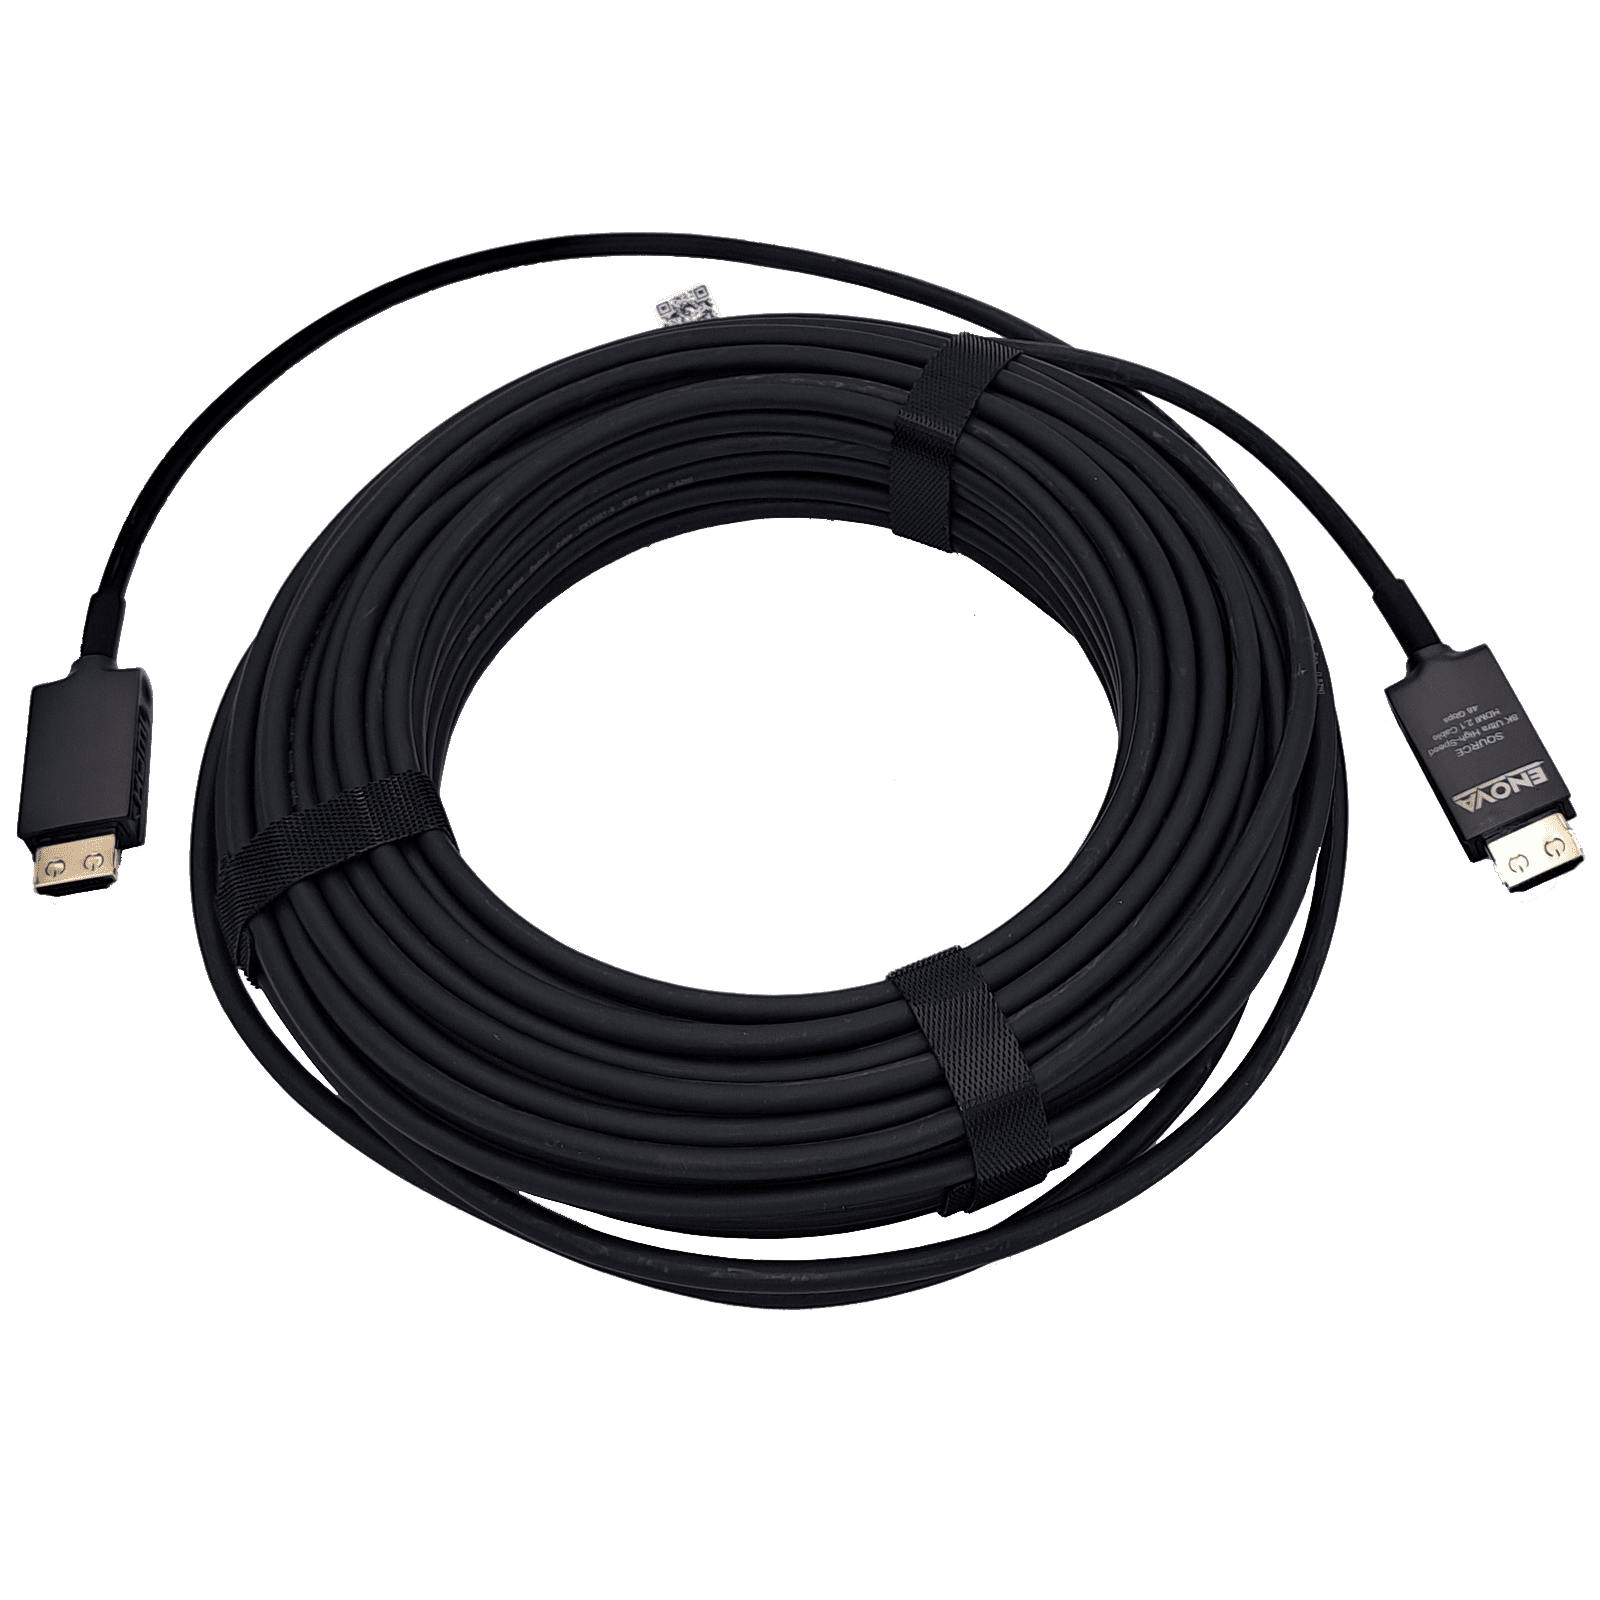 HDMI 2.1 AOC Link - active optical cable